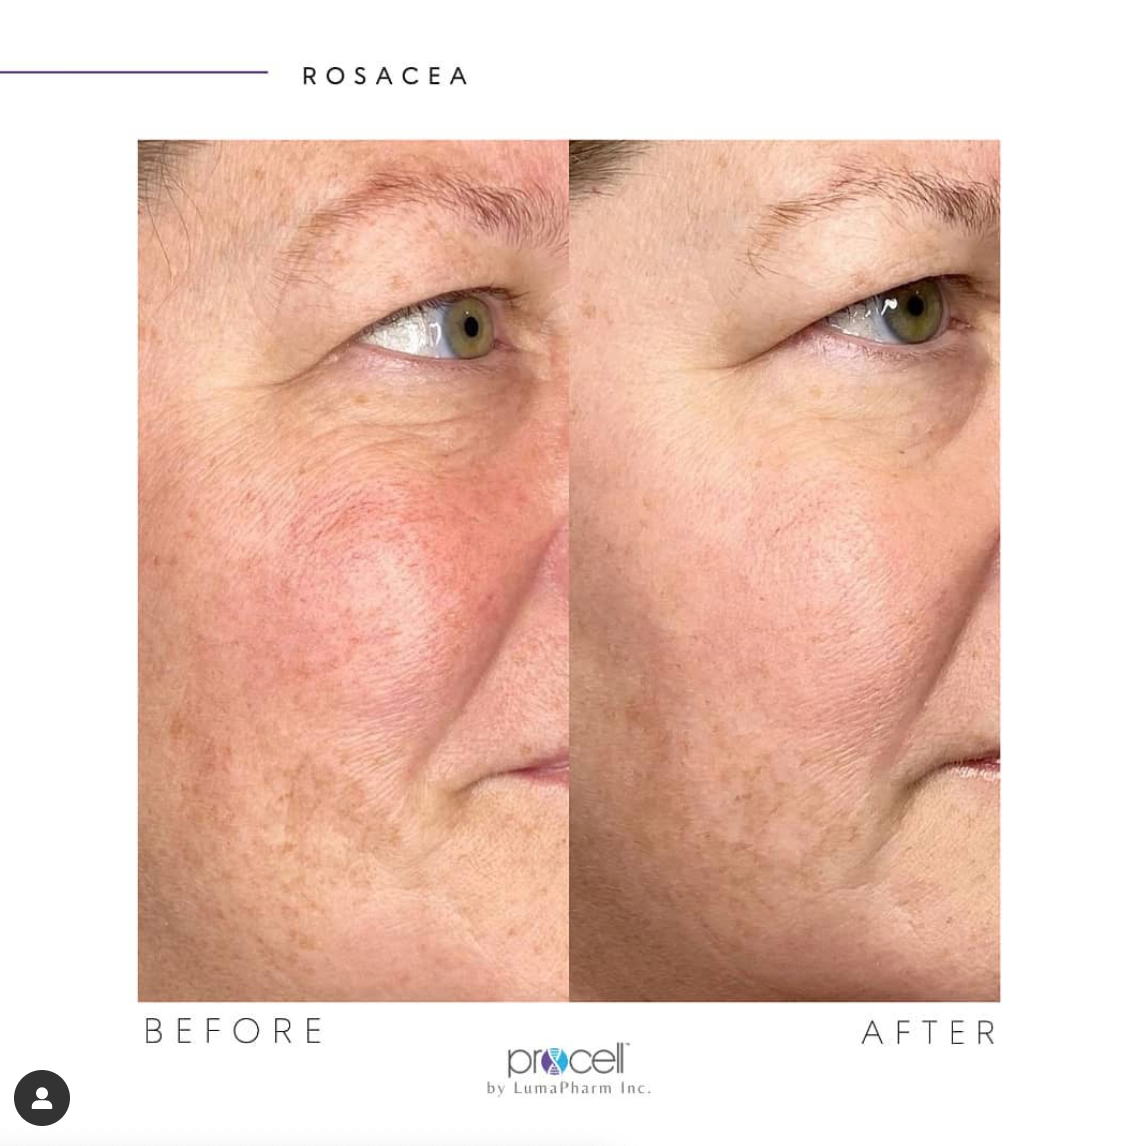 A before and after photo of a woman 's face with red spots.